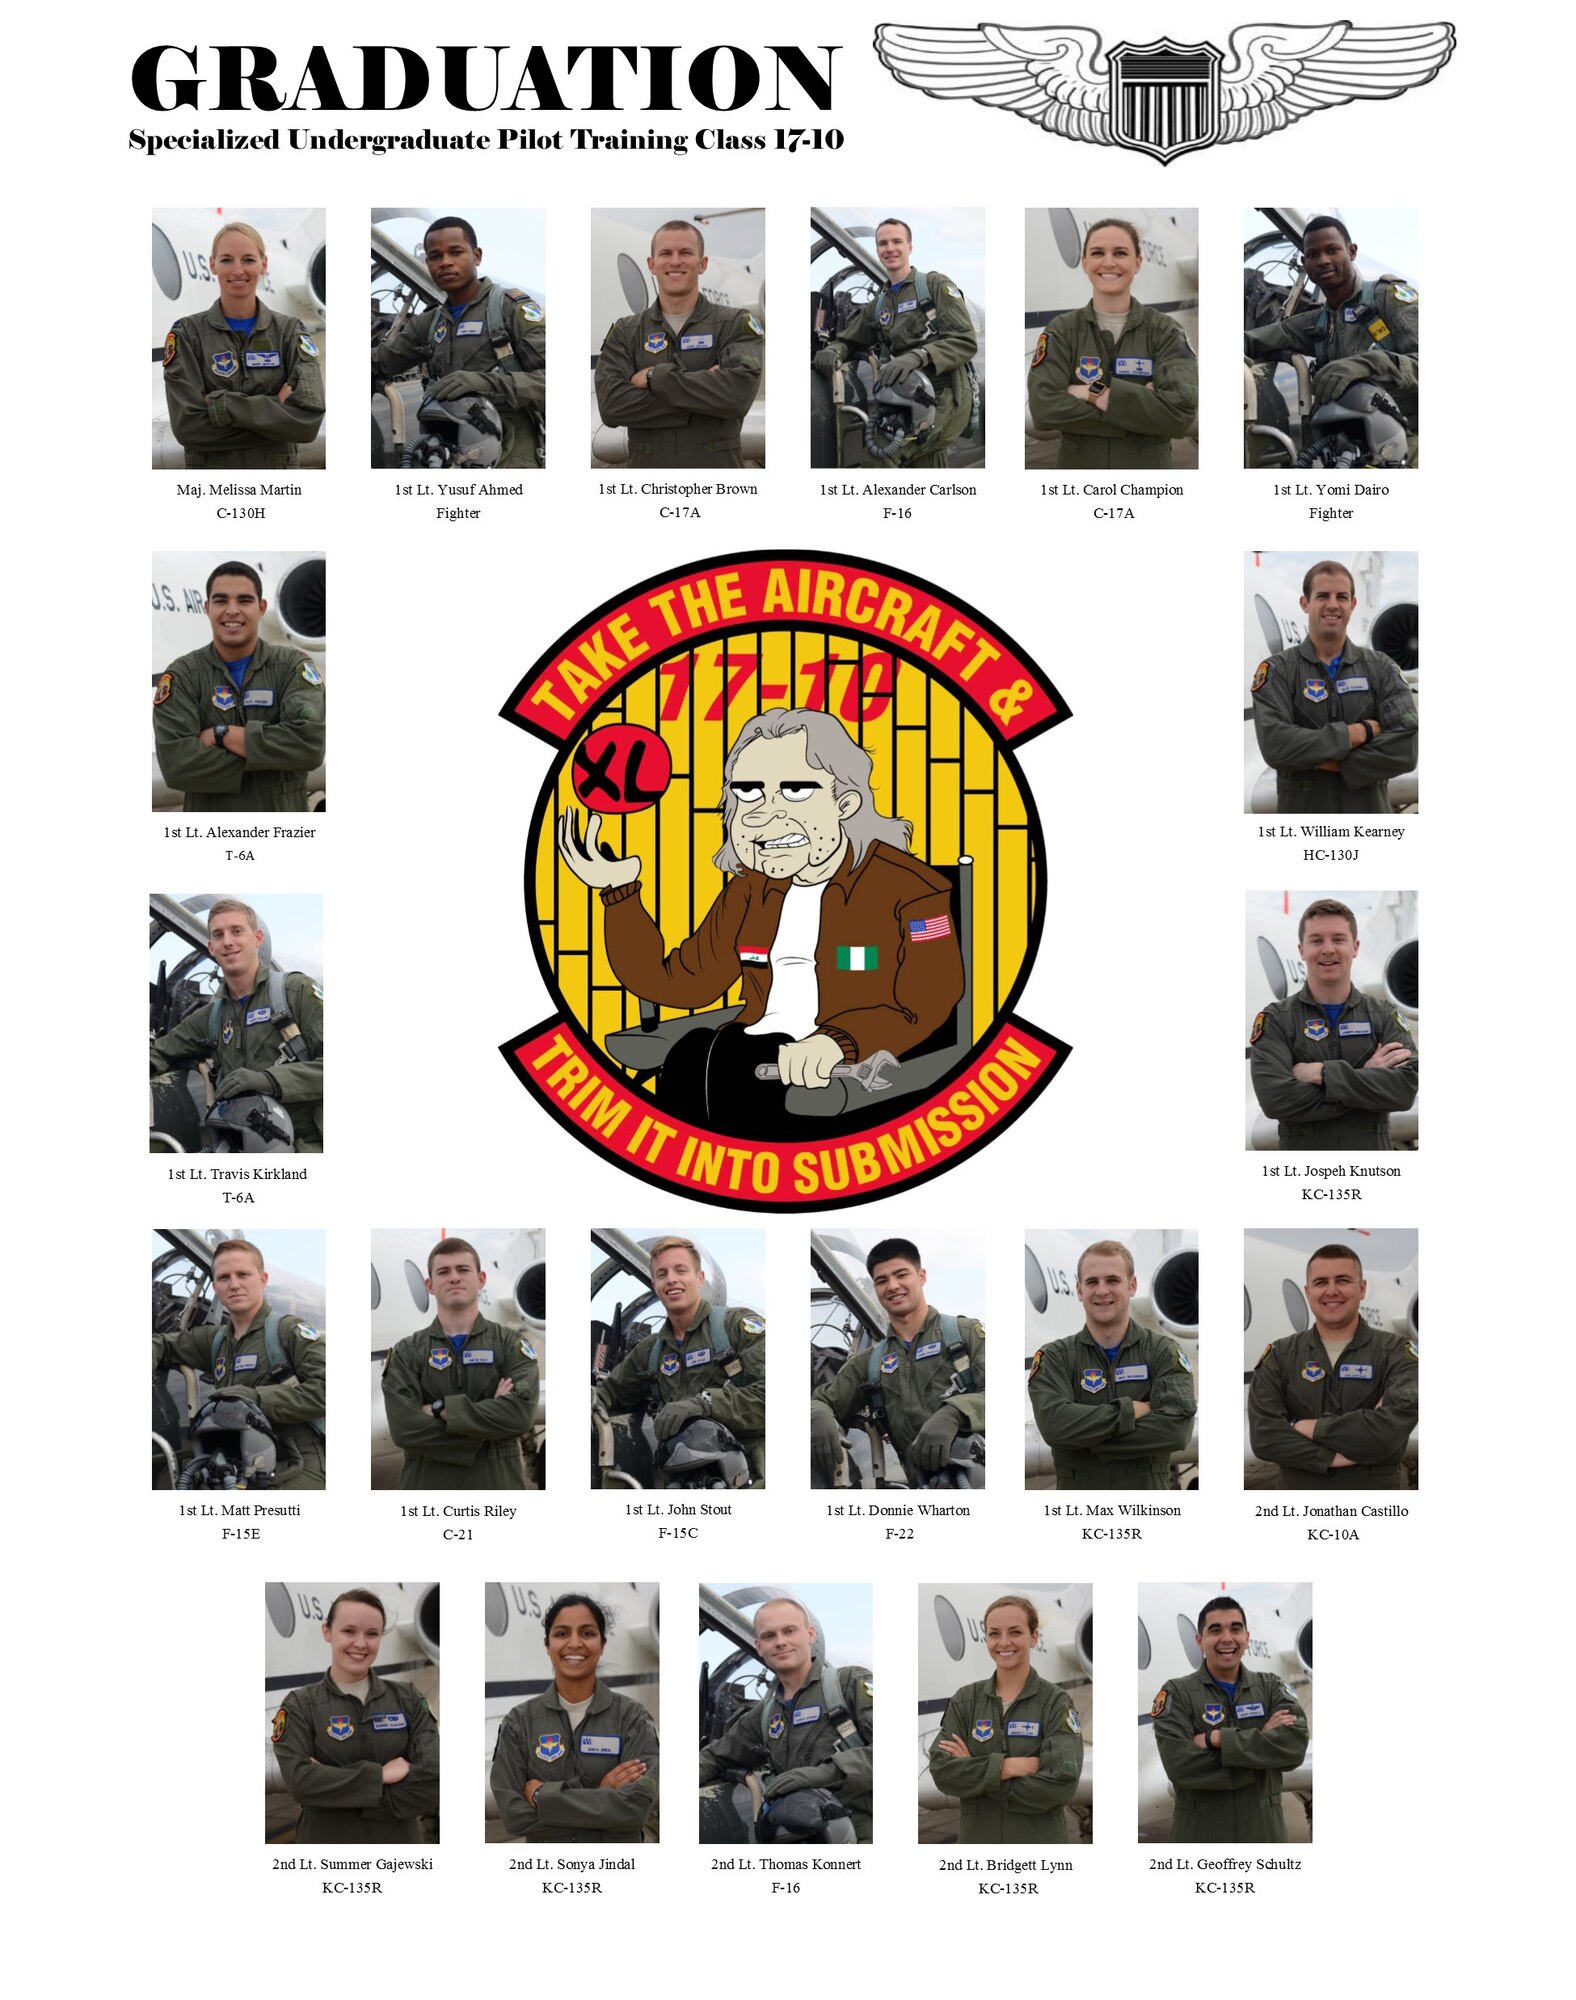 All Laughlin members are invited to attend Specialized Undergraduate Pilot Training Class 17-10's graduation ceremony June 9, at 10 a.m. in Anderson Hall, here.
Col Brian Runkle, 47th Operations Group commander, will be the guest speaker, and awards will be given to stand-out members of the class.
Laughlin graduates more than 300 pilots annually. 
